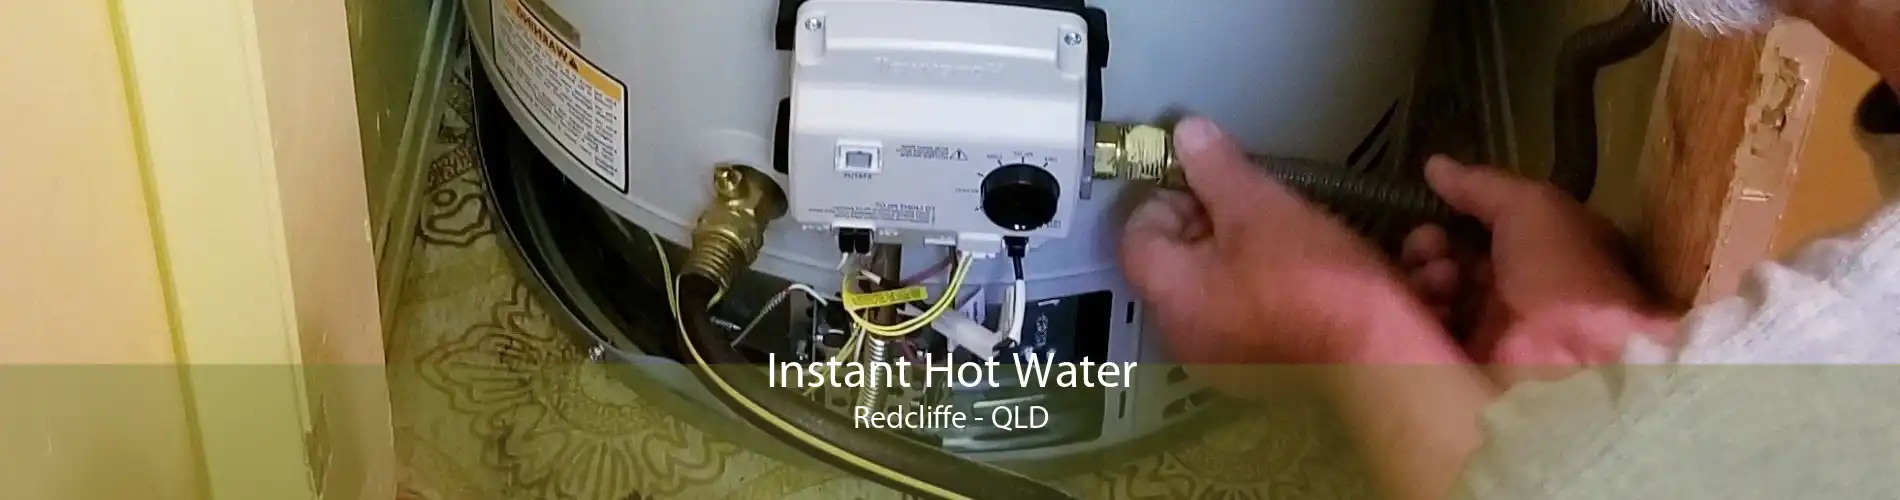 Instant Hot Water Redcliffe - QLD